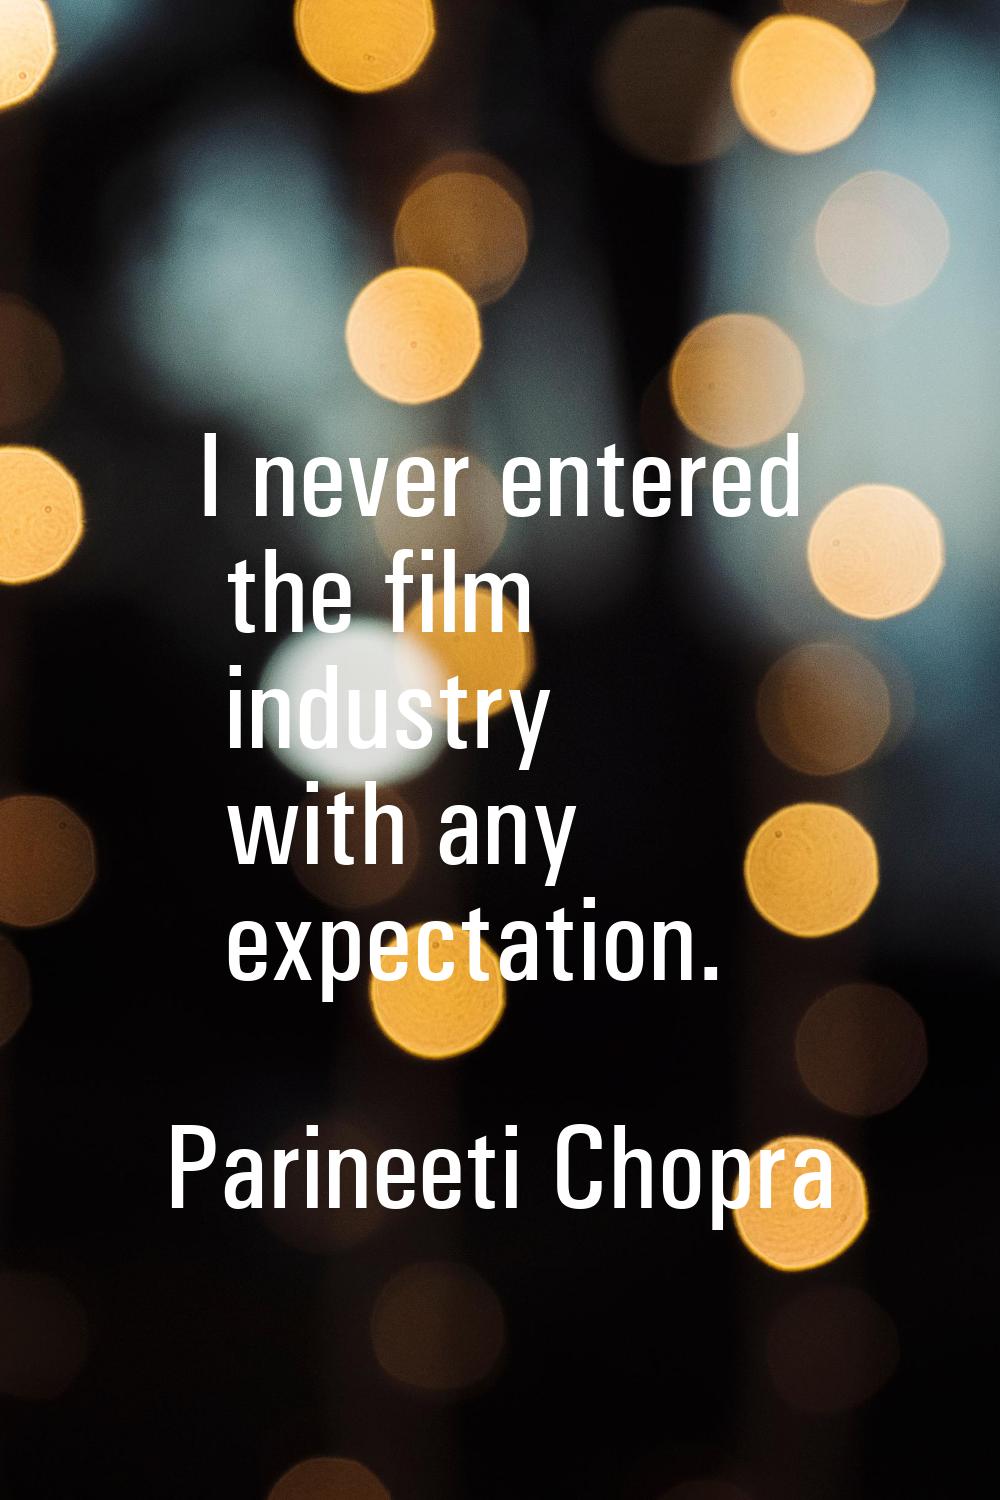 I never entered the film industry with any expectation.